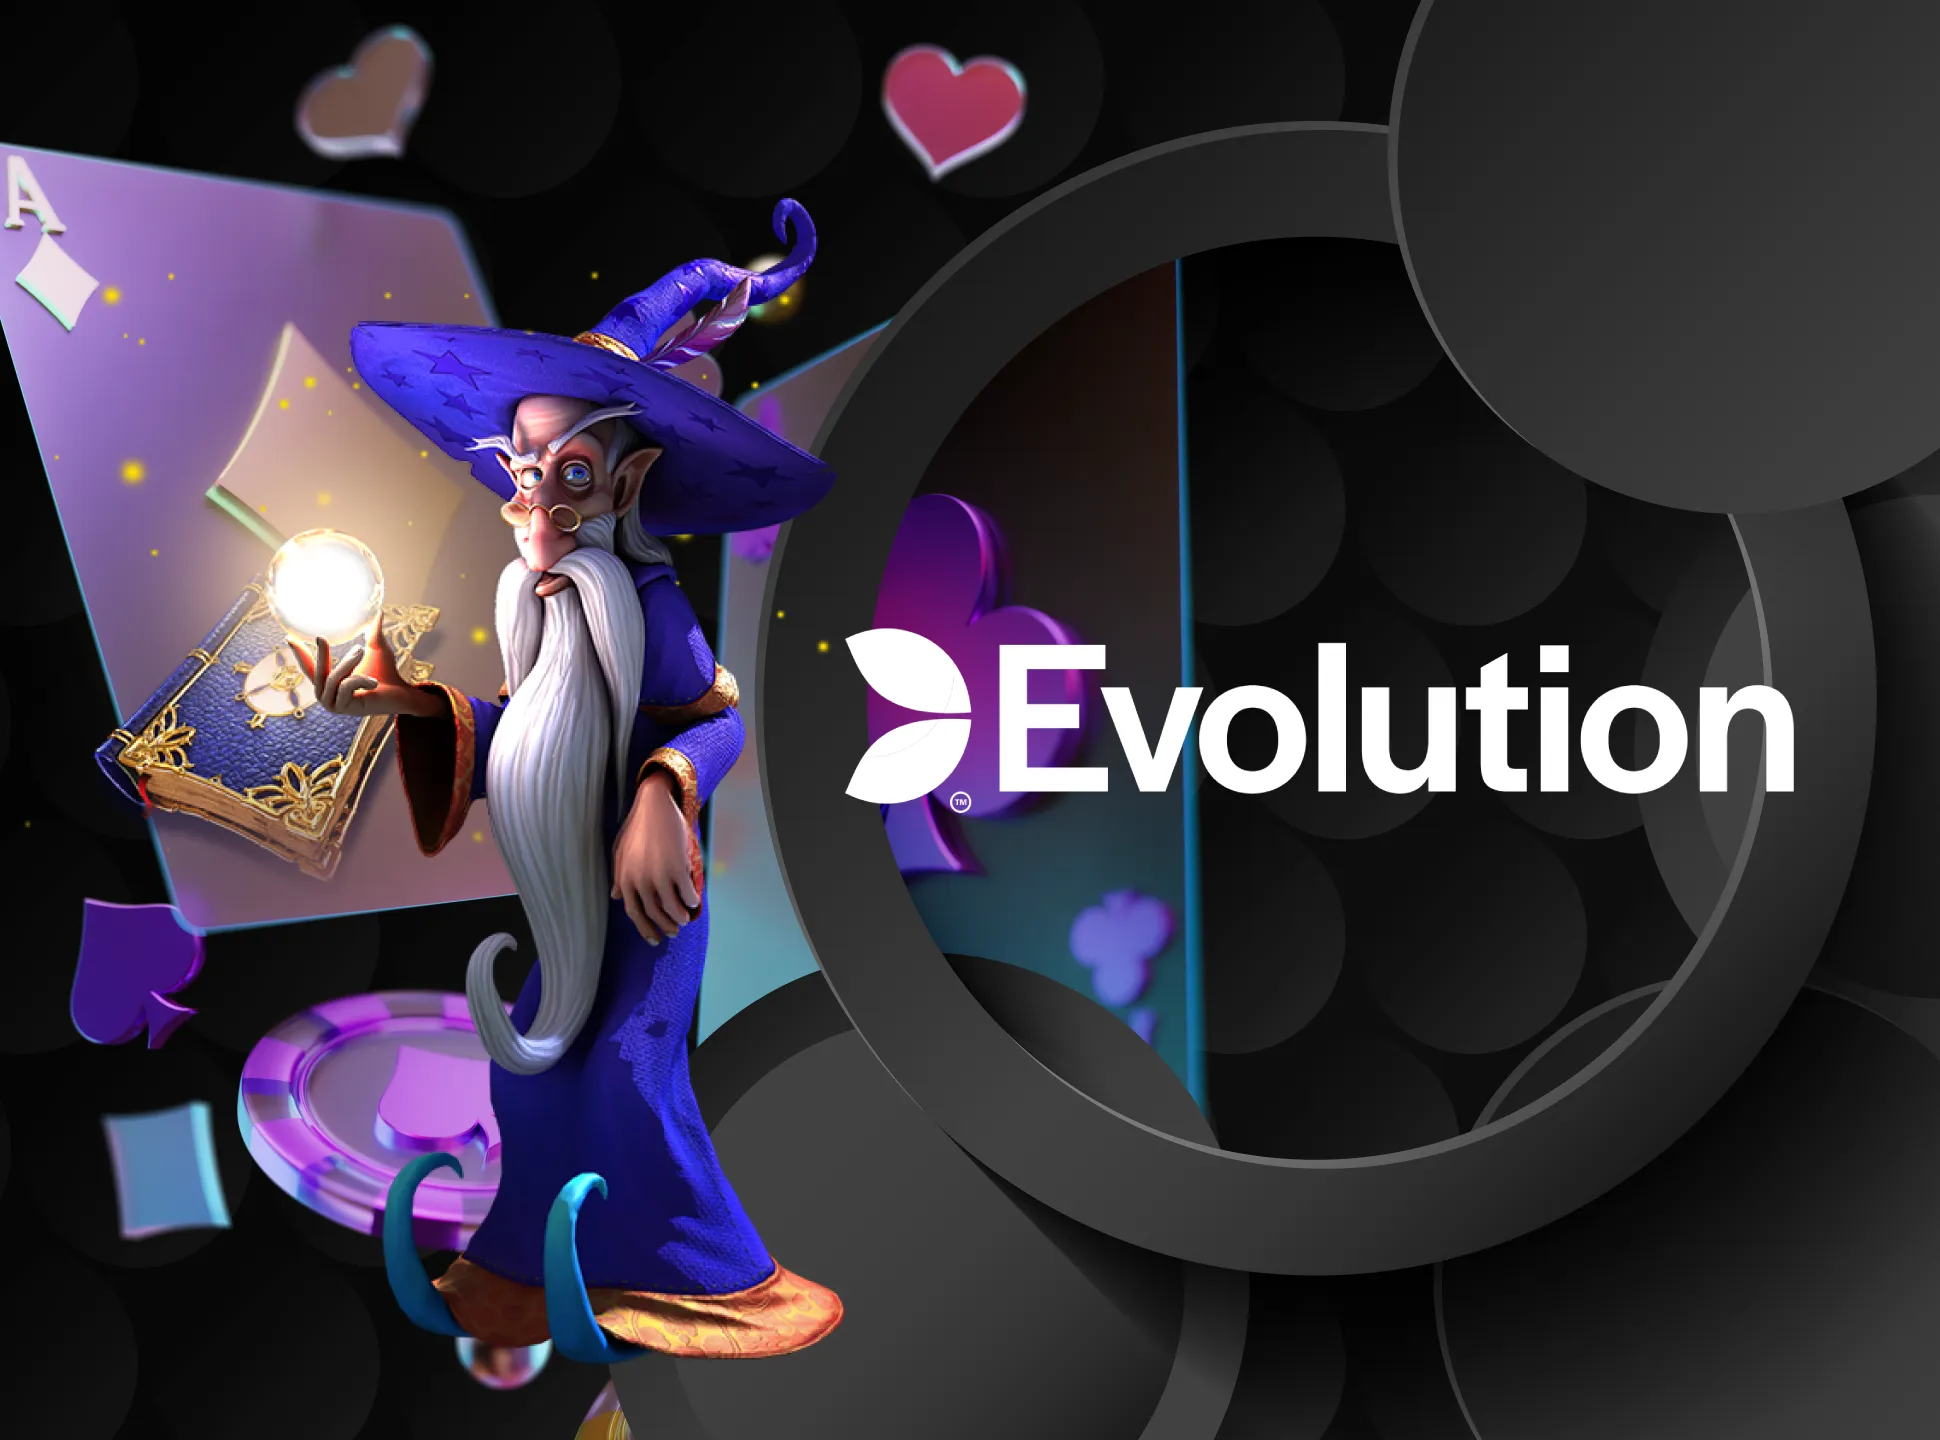 Evolution launches quality and smooth games for online casinos.